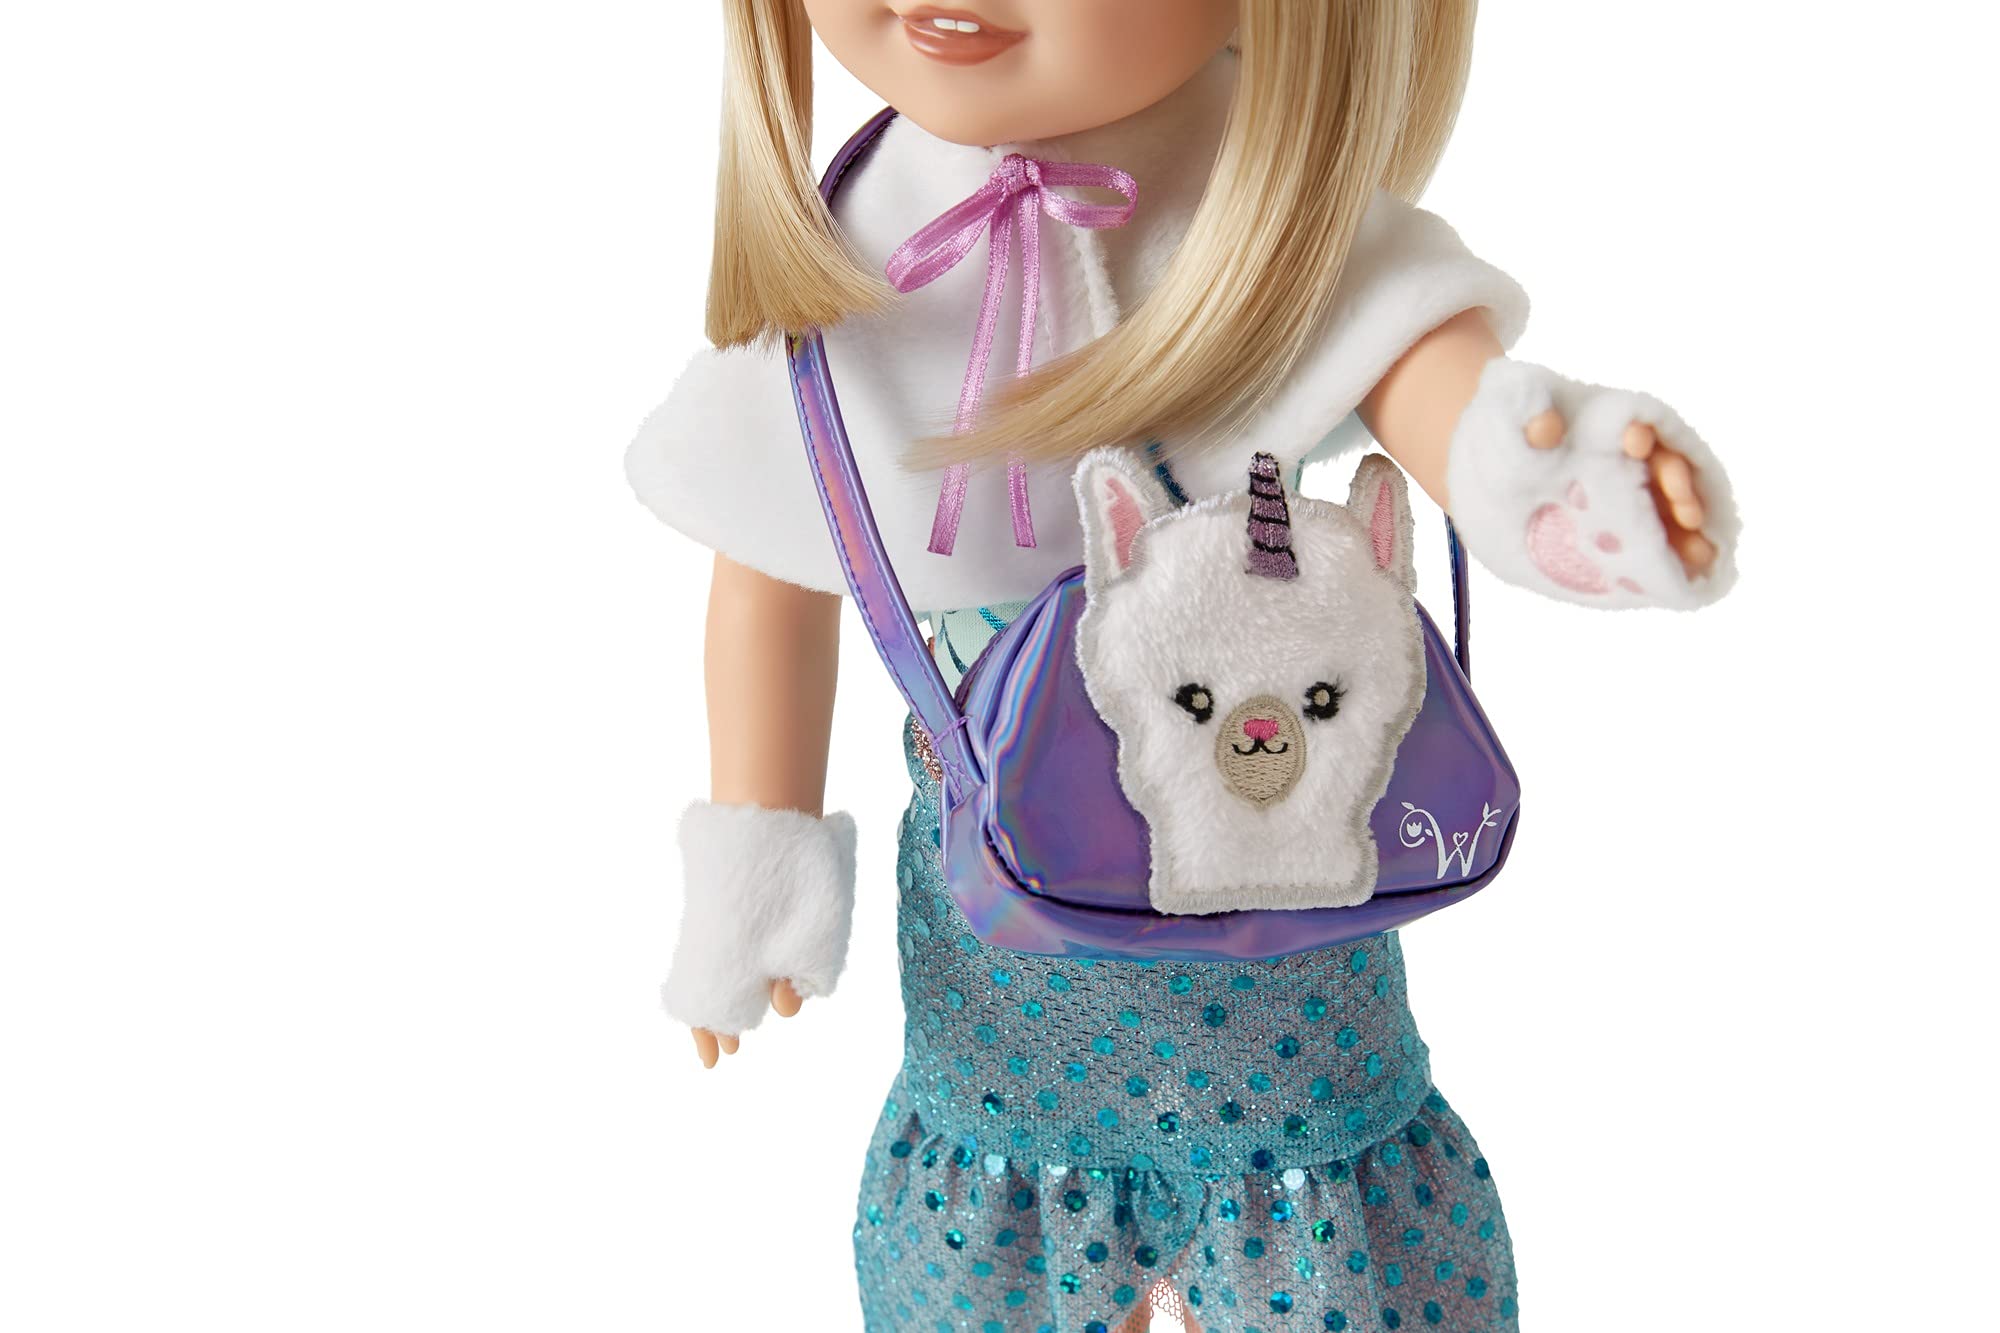 American Girl WellieWishers Magical Llamacorn Accessories for 14.5